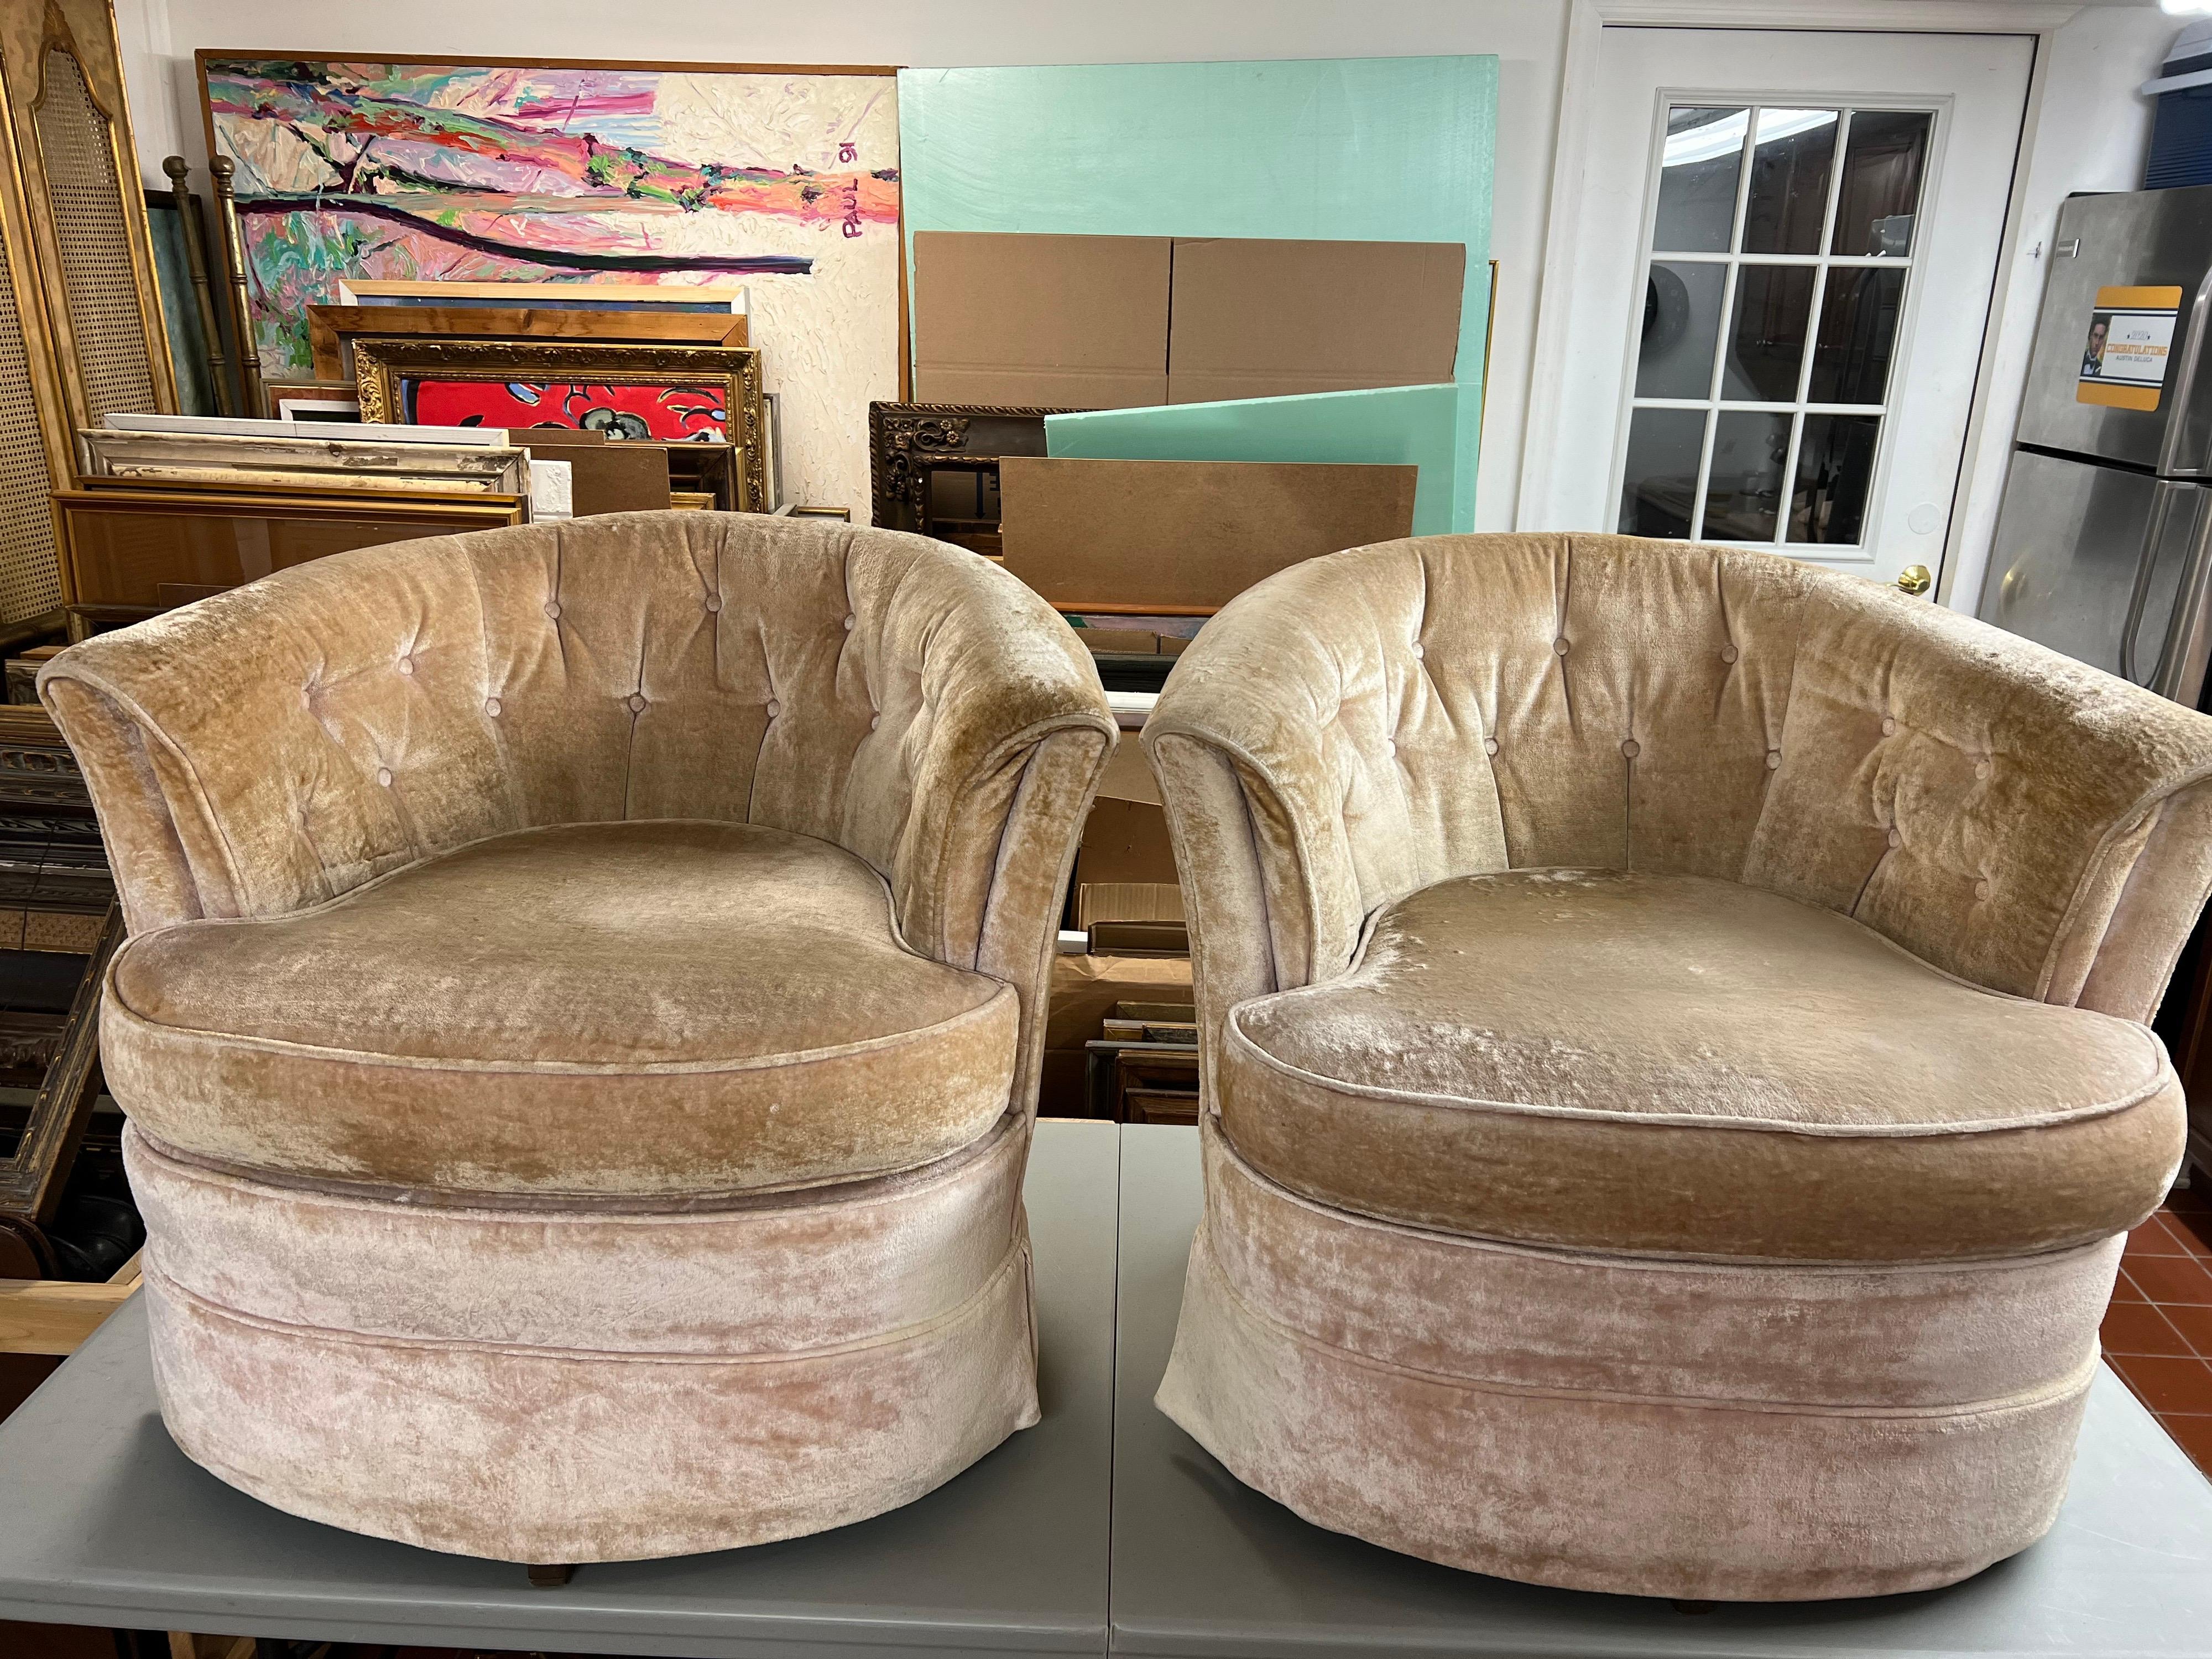 Pair of Mid-Century Modern crushed velvet swivel chairs. Fabulous high glam chairs to accent any room. Low profile back and classic shape. Use as is or recover. Soft Champagne color.
Measures:
seat depth is 20